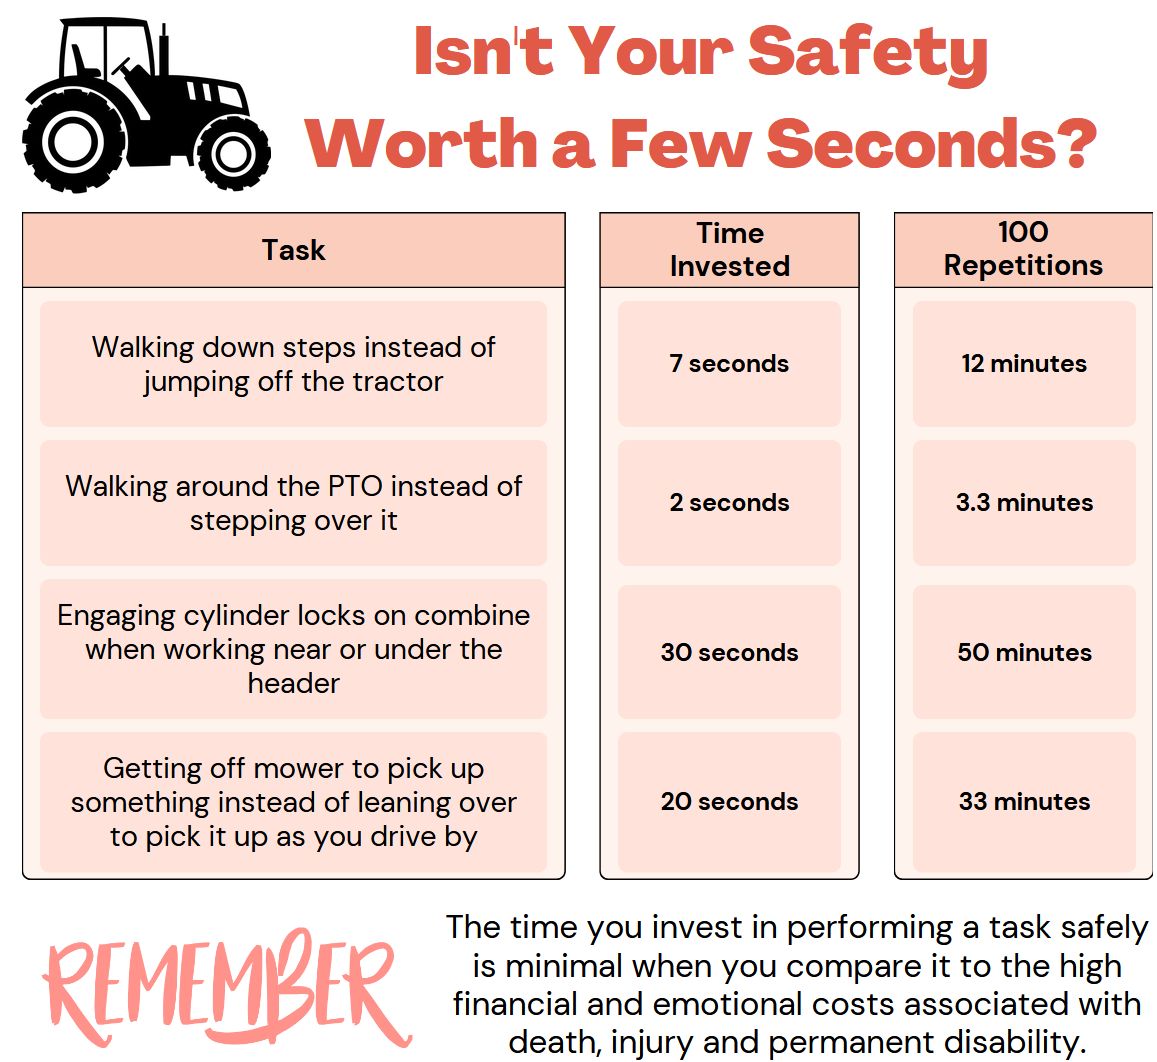 Isn't your safety worth a few extra seconds? Example breakdown of tasks, time invested, and small amounts of time saved versus high levels of risk. 